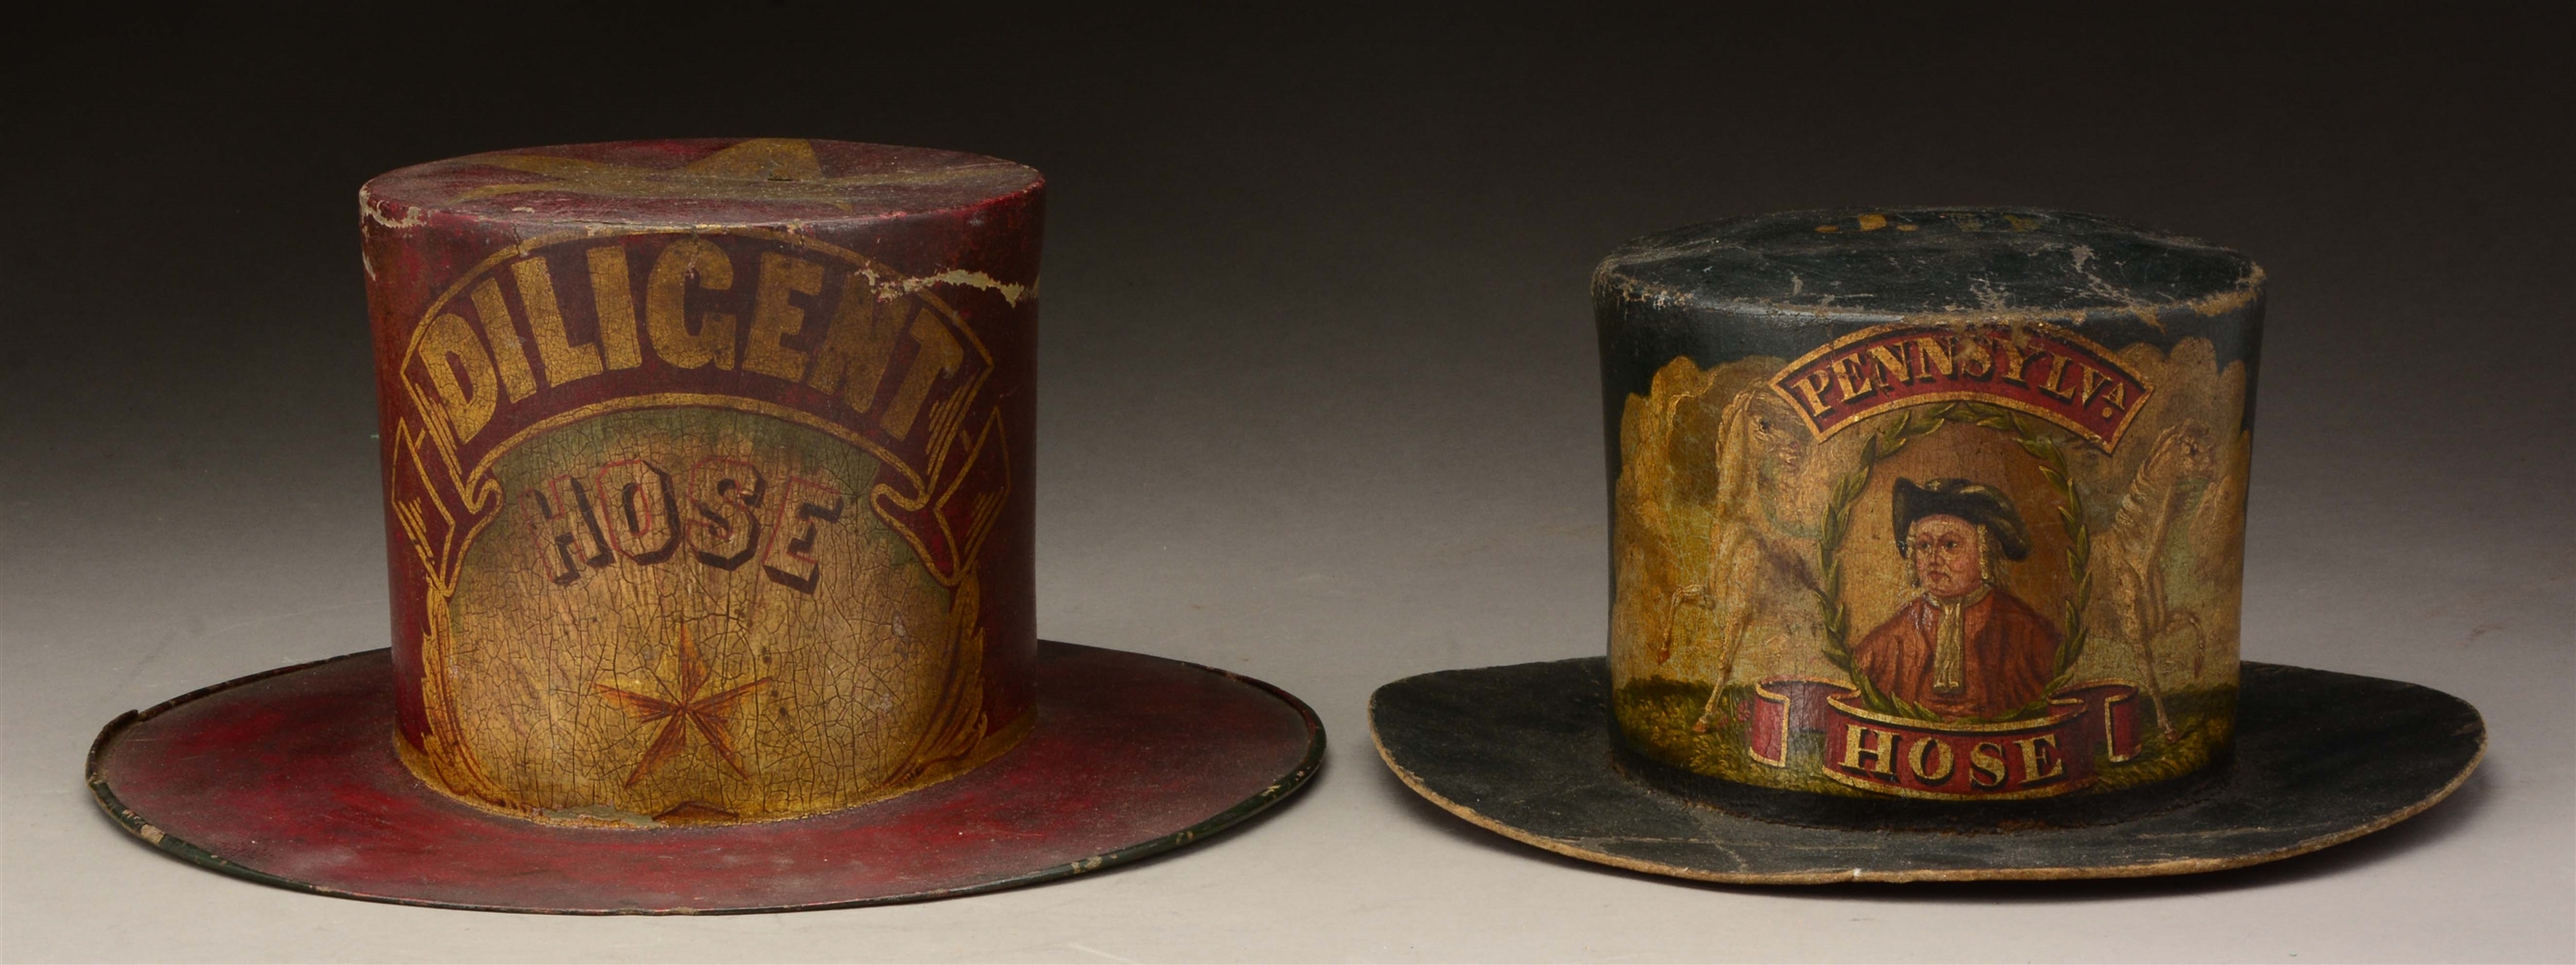 LOT OF 2: FINE EARLY AMERICAN FIREMAN PARADE HATS. 